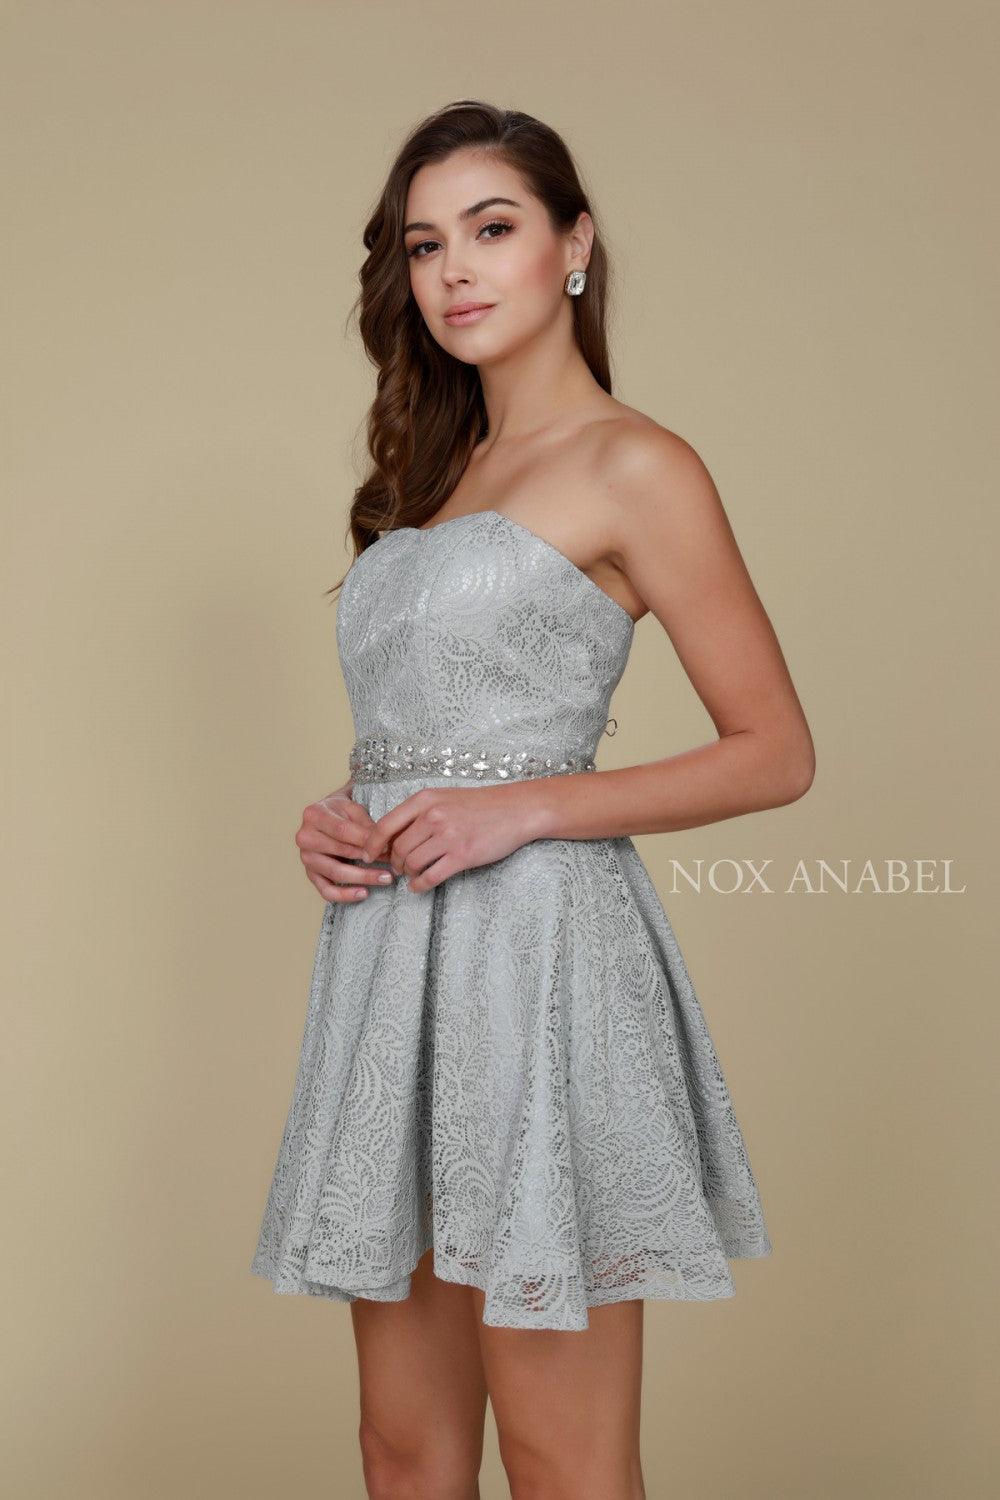 Short Strapless Formal Homecoming Dress - The Dress Outlet Nox Anabel